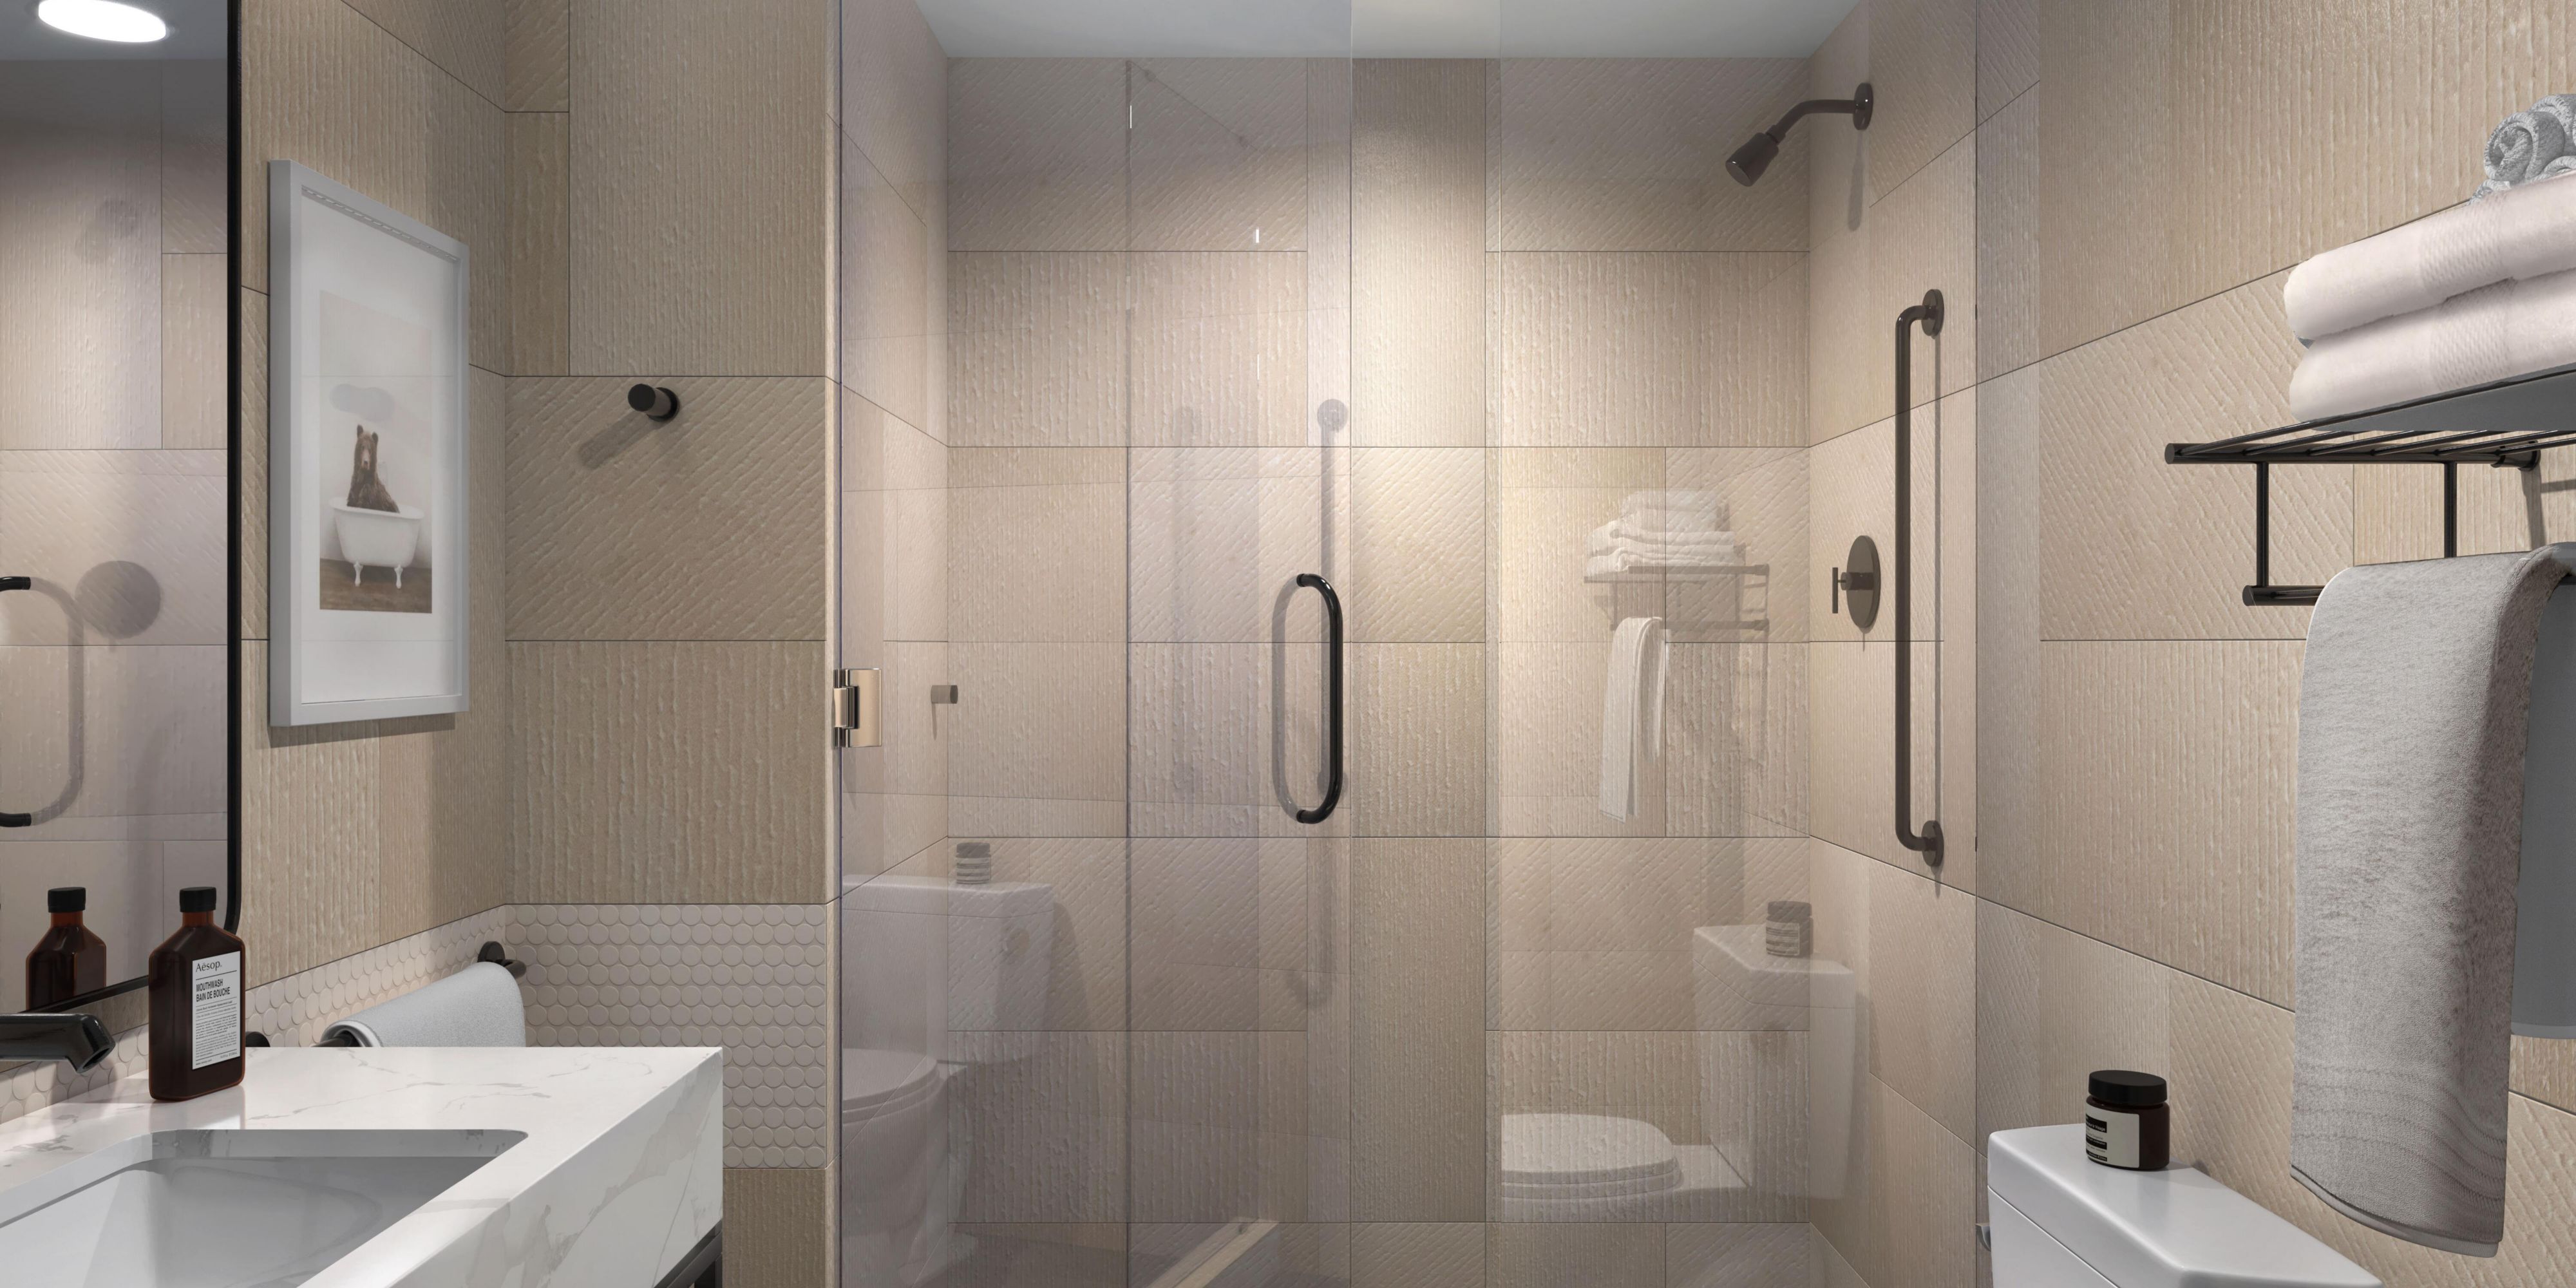 New, modern guest bathroom at NYC hotel near Times Square